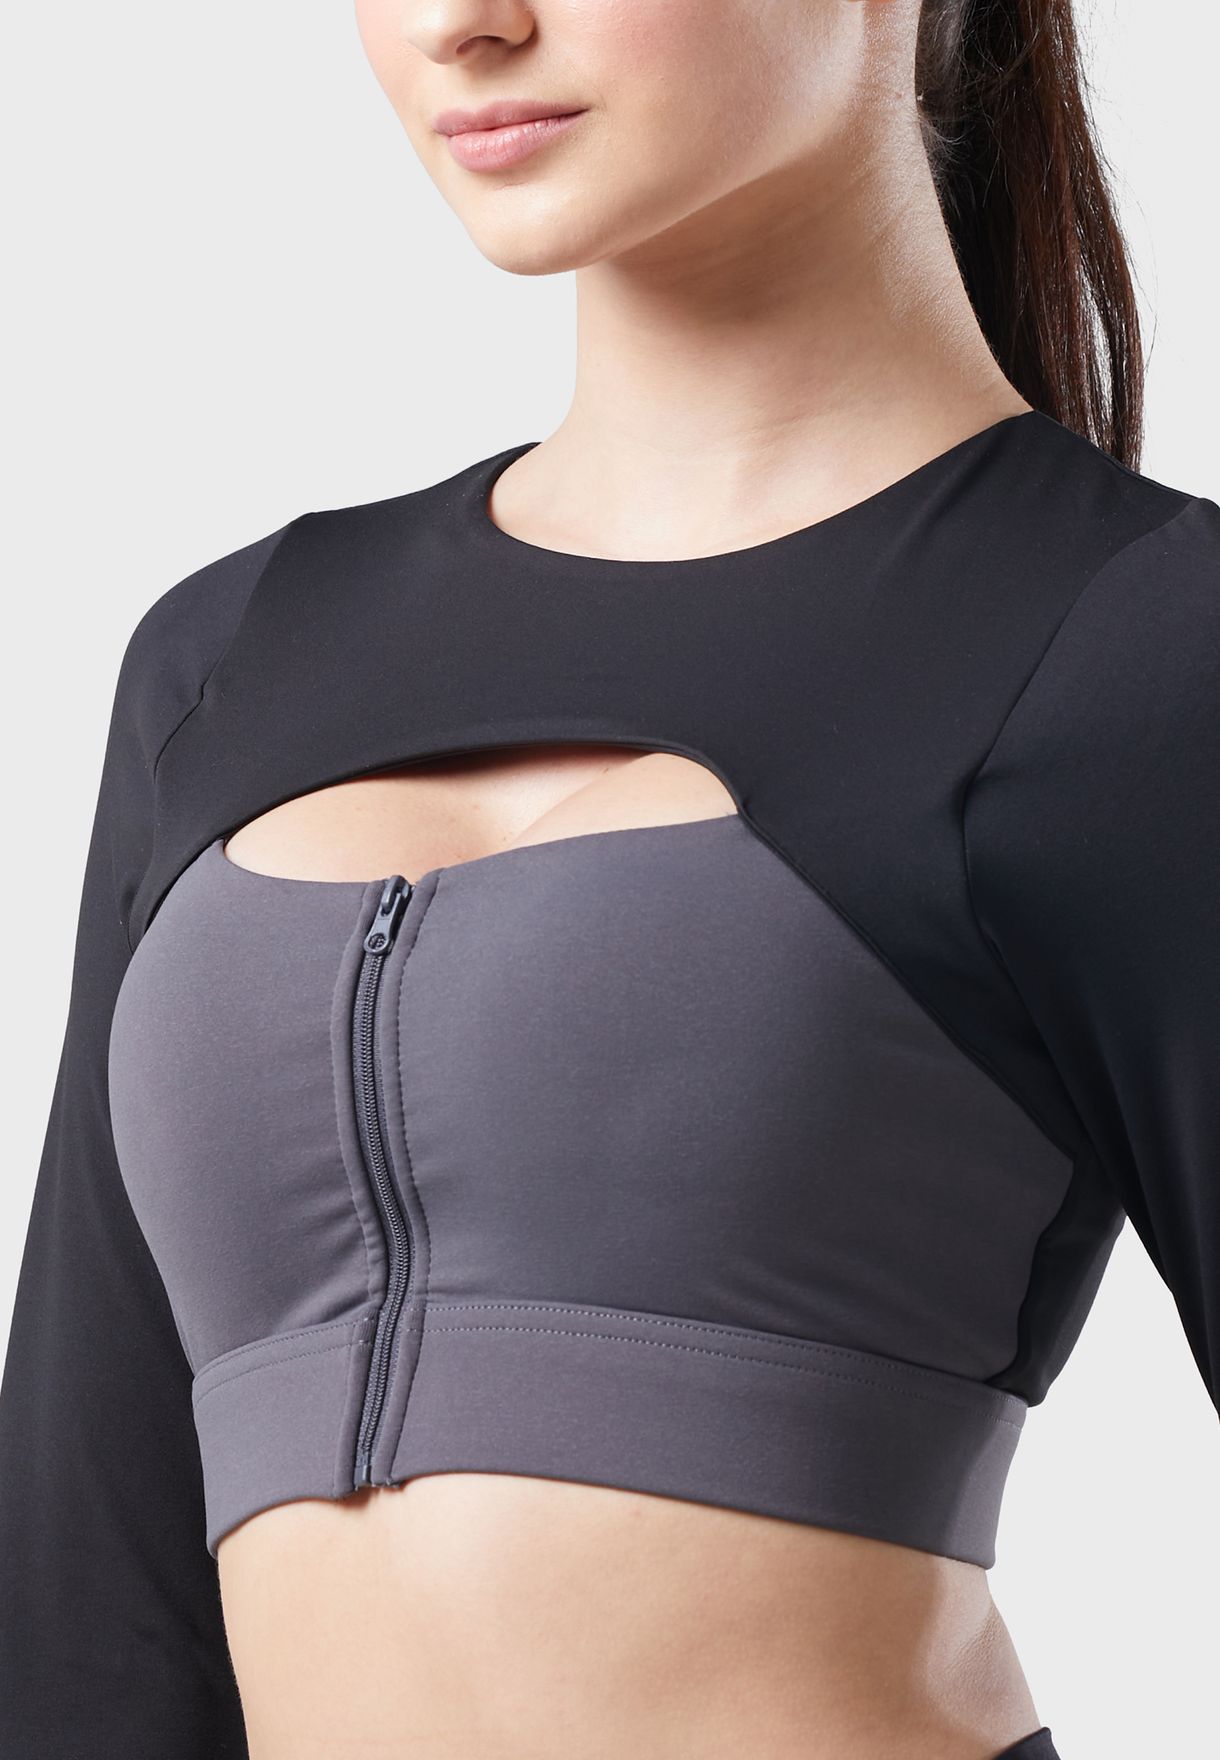 Cut Out Athletic Bra